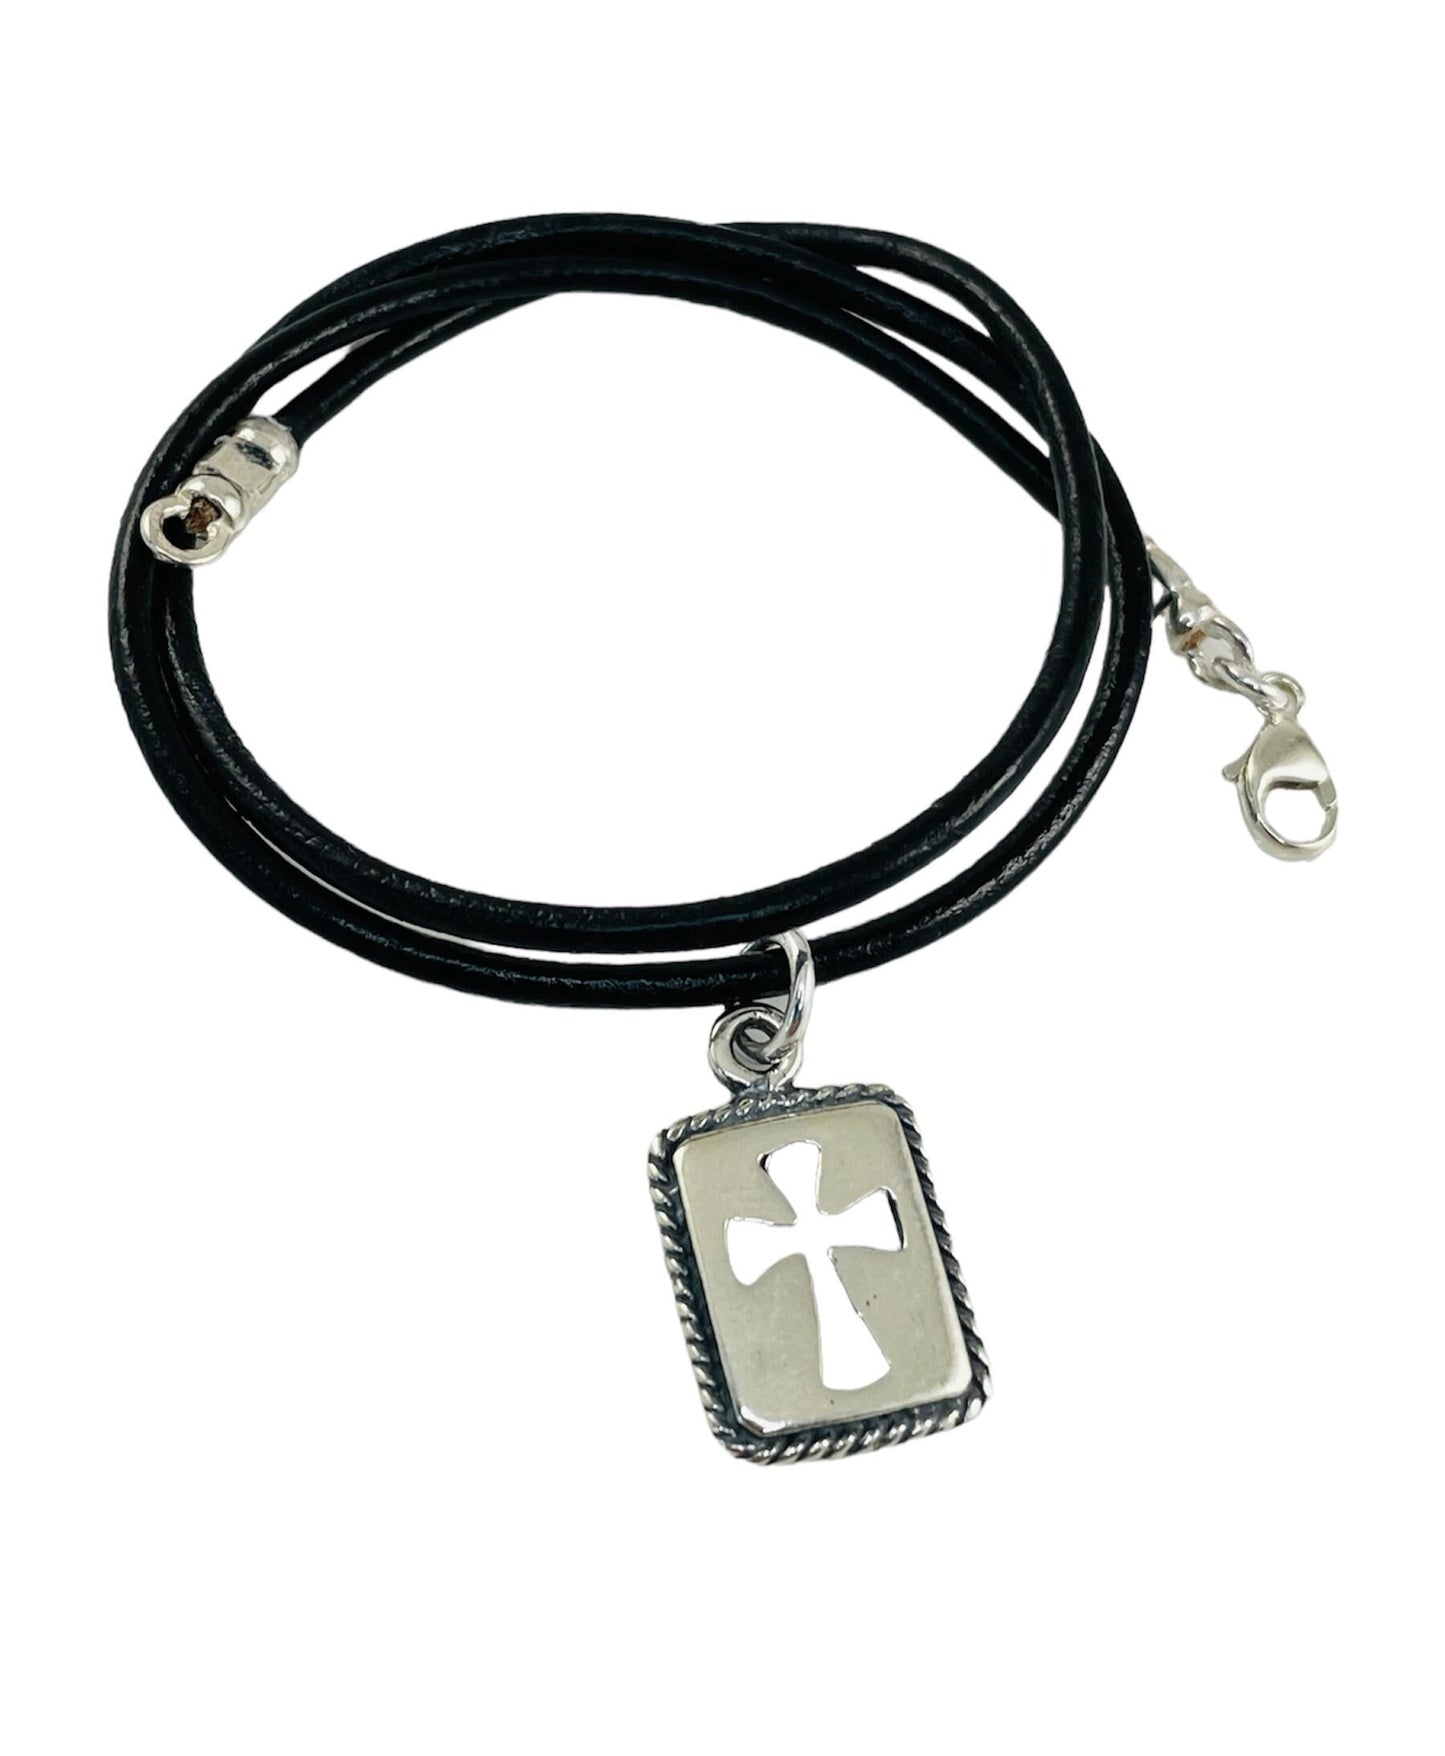 Mens Boys Leather and Sterling Silver Rectangle Cross Necklace Choker,Boy Baptism Communion Christian Confirmation Cross Necklace Jewelry